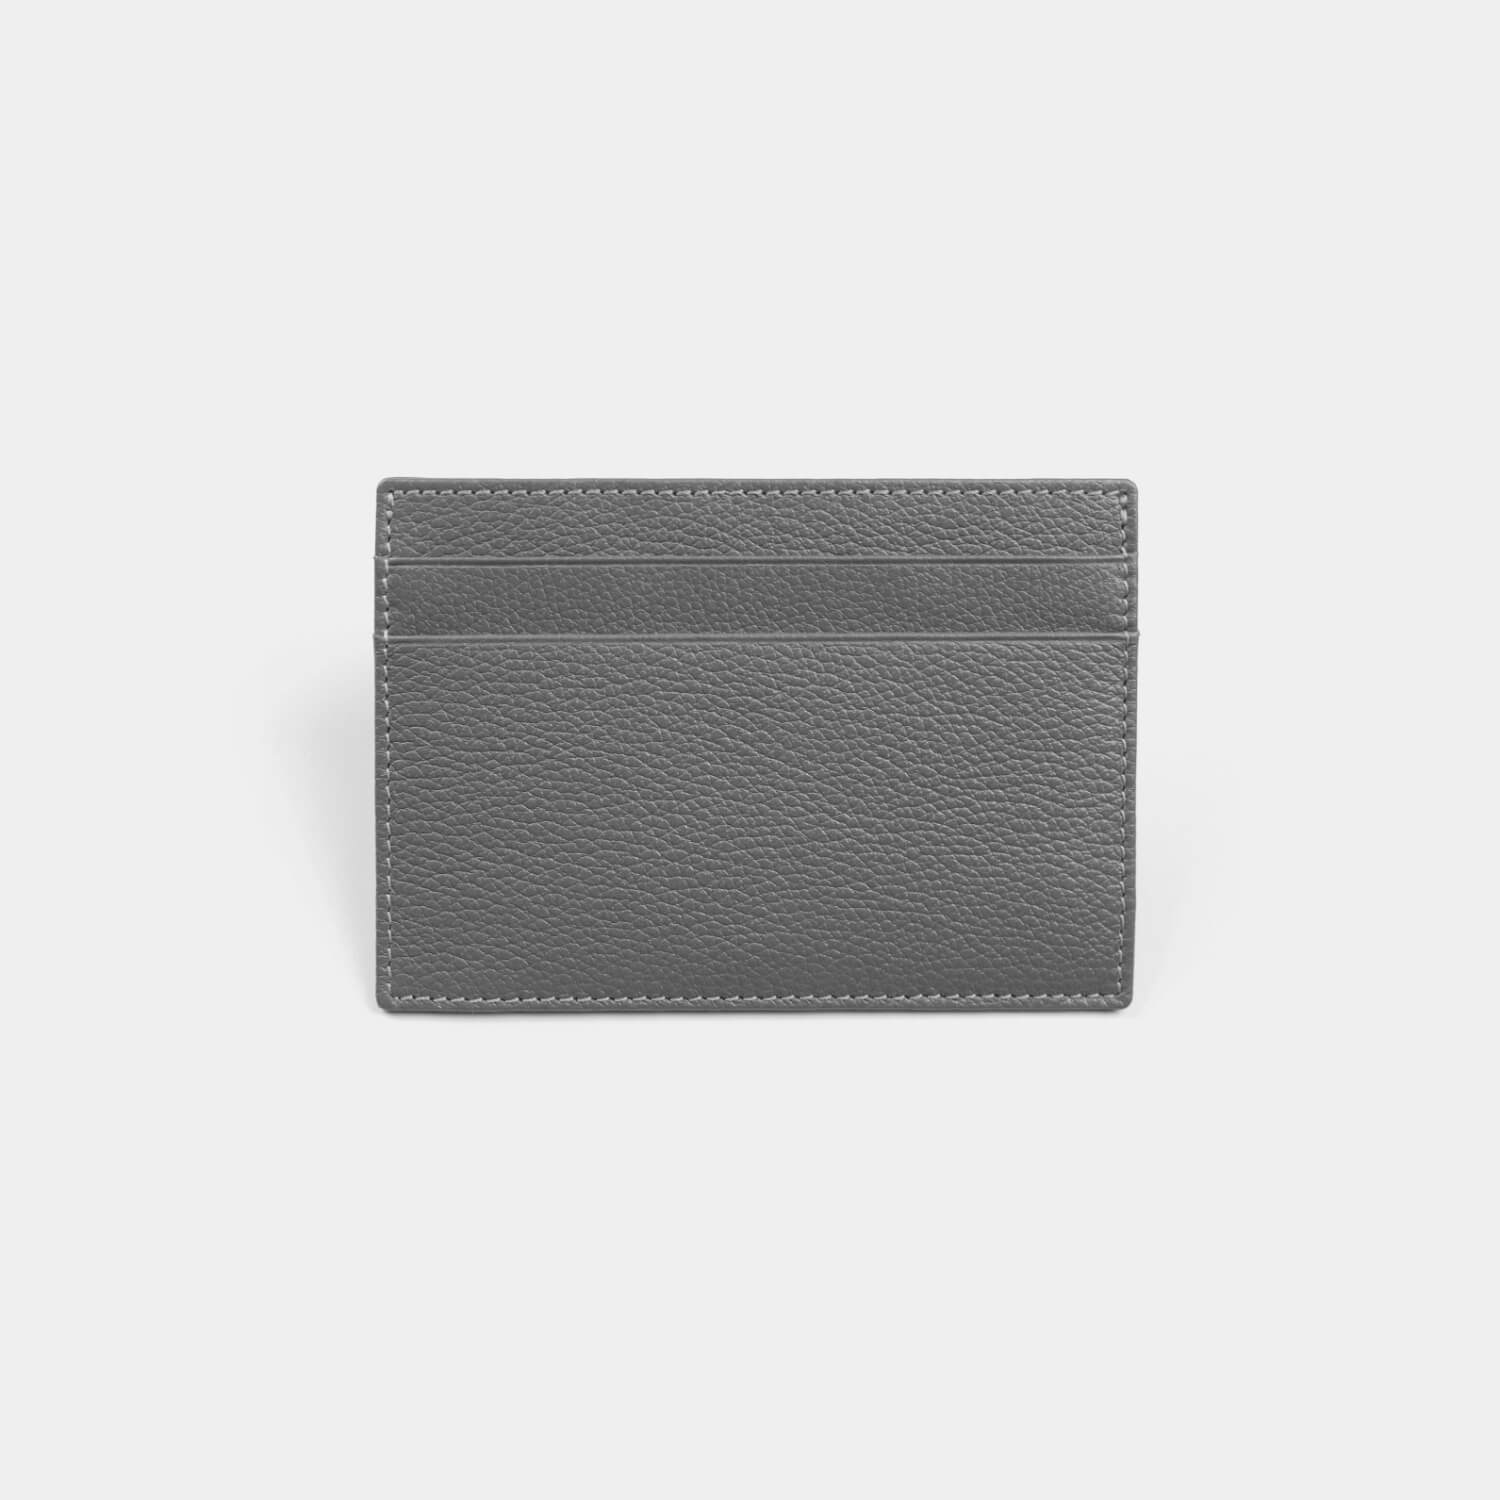 Fine grain leather flat slimline card case for credit cards and business cards, branded with your company logo